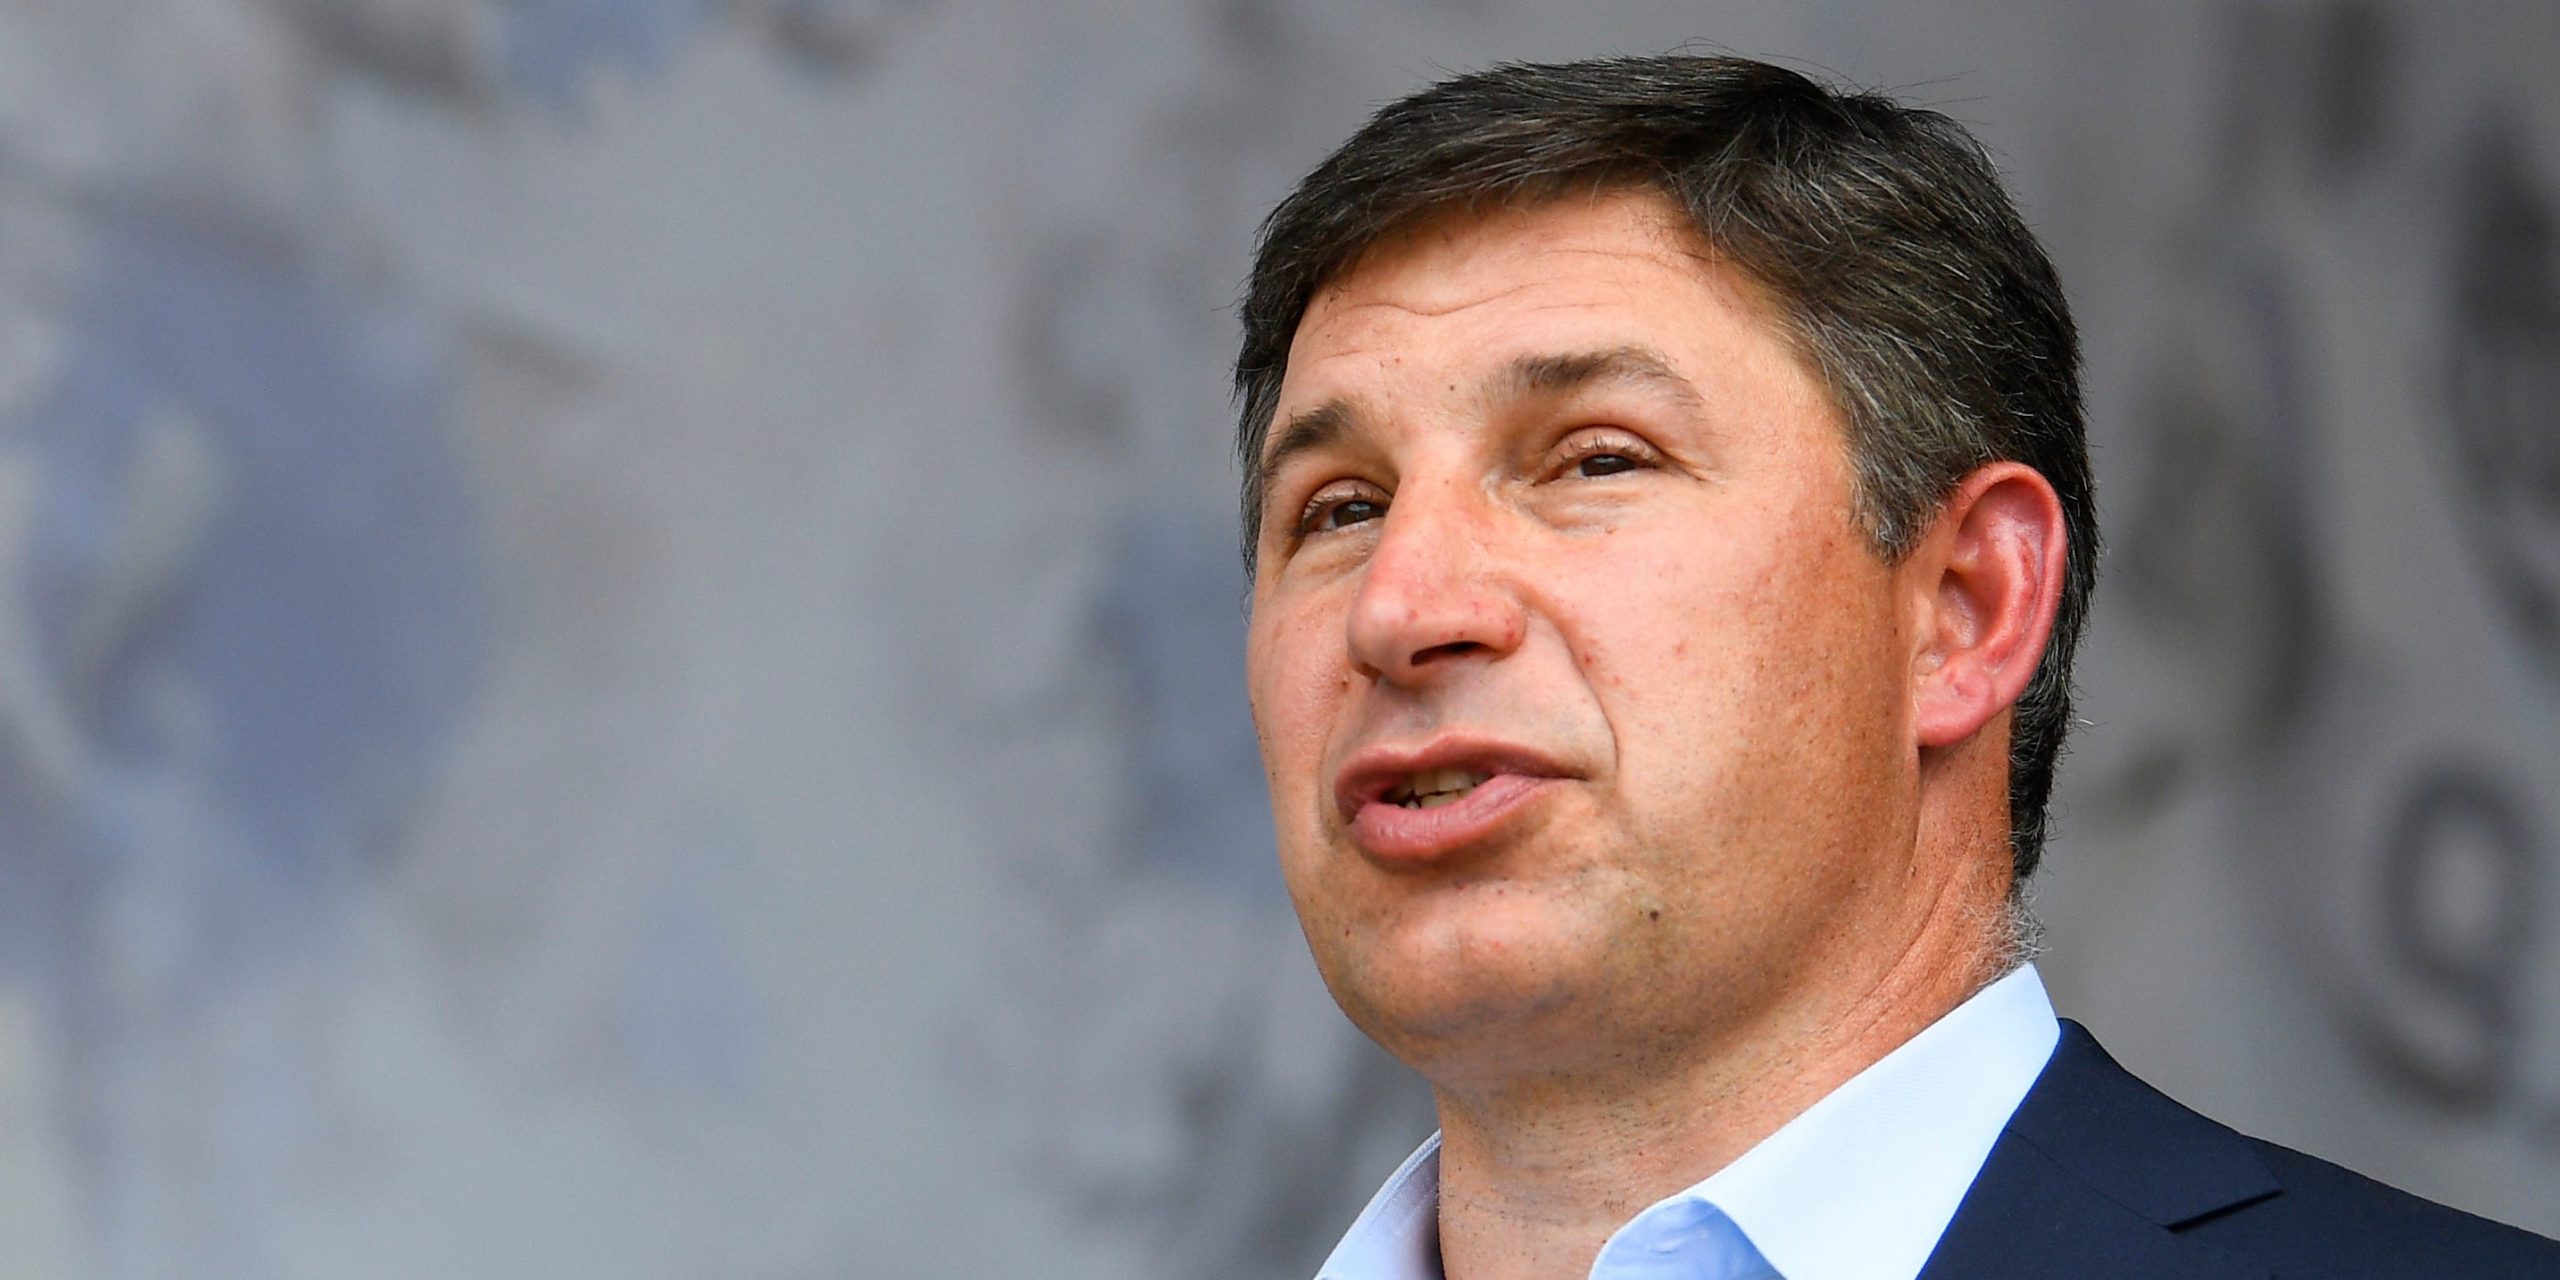 SoFi CEO Anthony Noto after announcing naming rights for the SoFi Stadium opening before an NFL game on September 15, 2019, at the Los Angeles Memorial Coliseum in Los Angeles, CA.